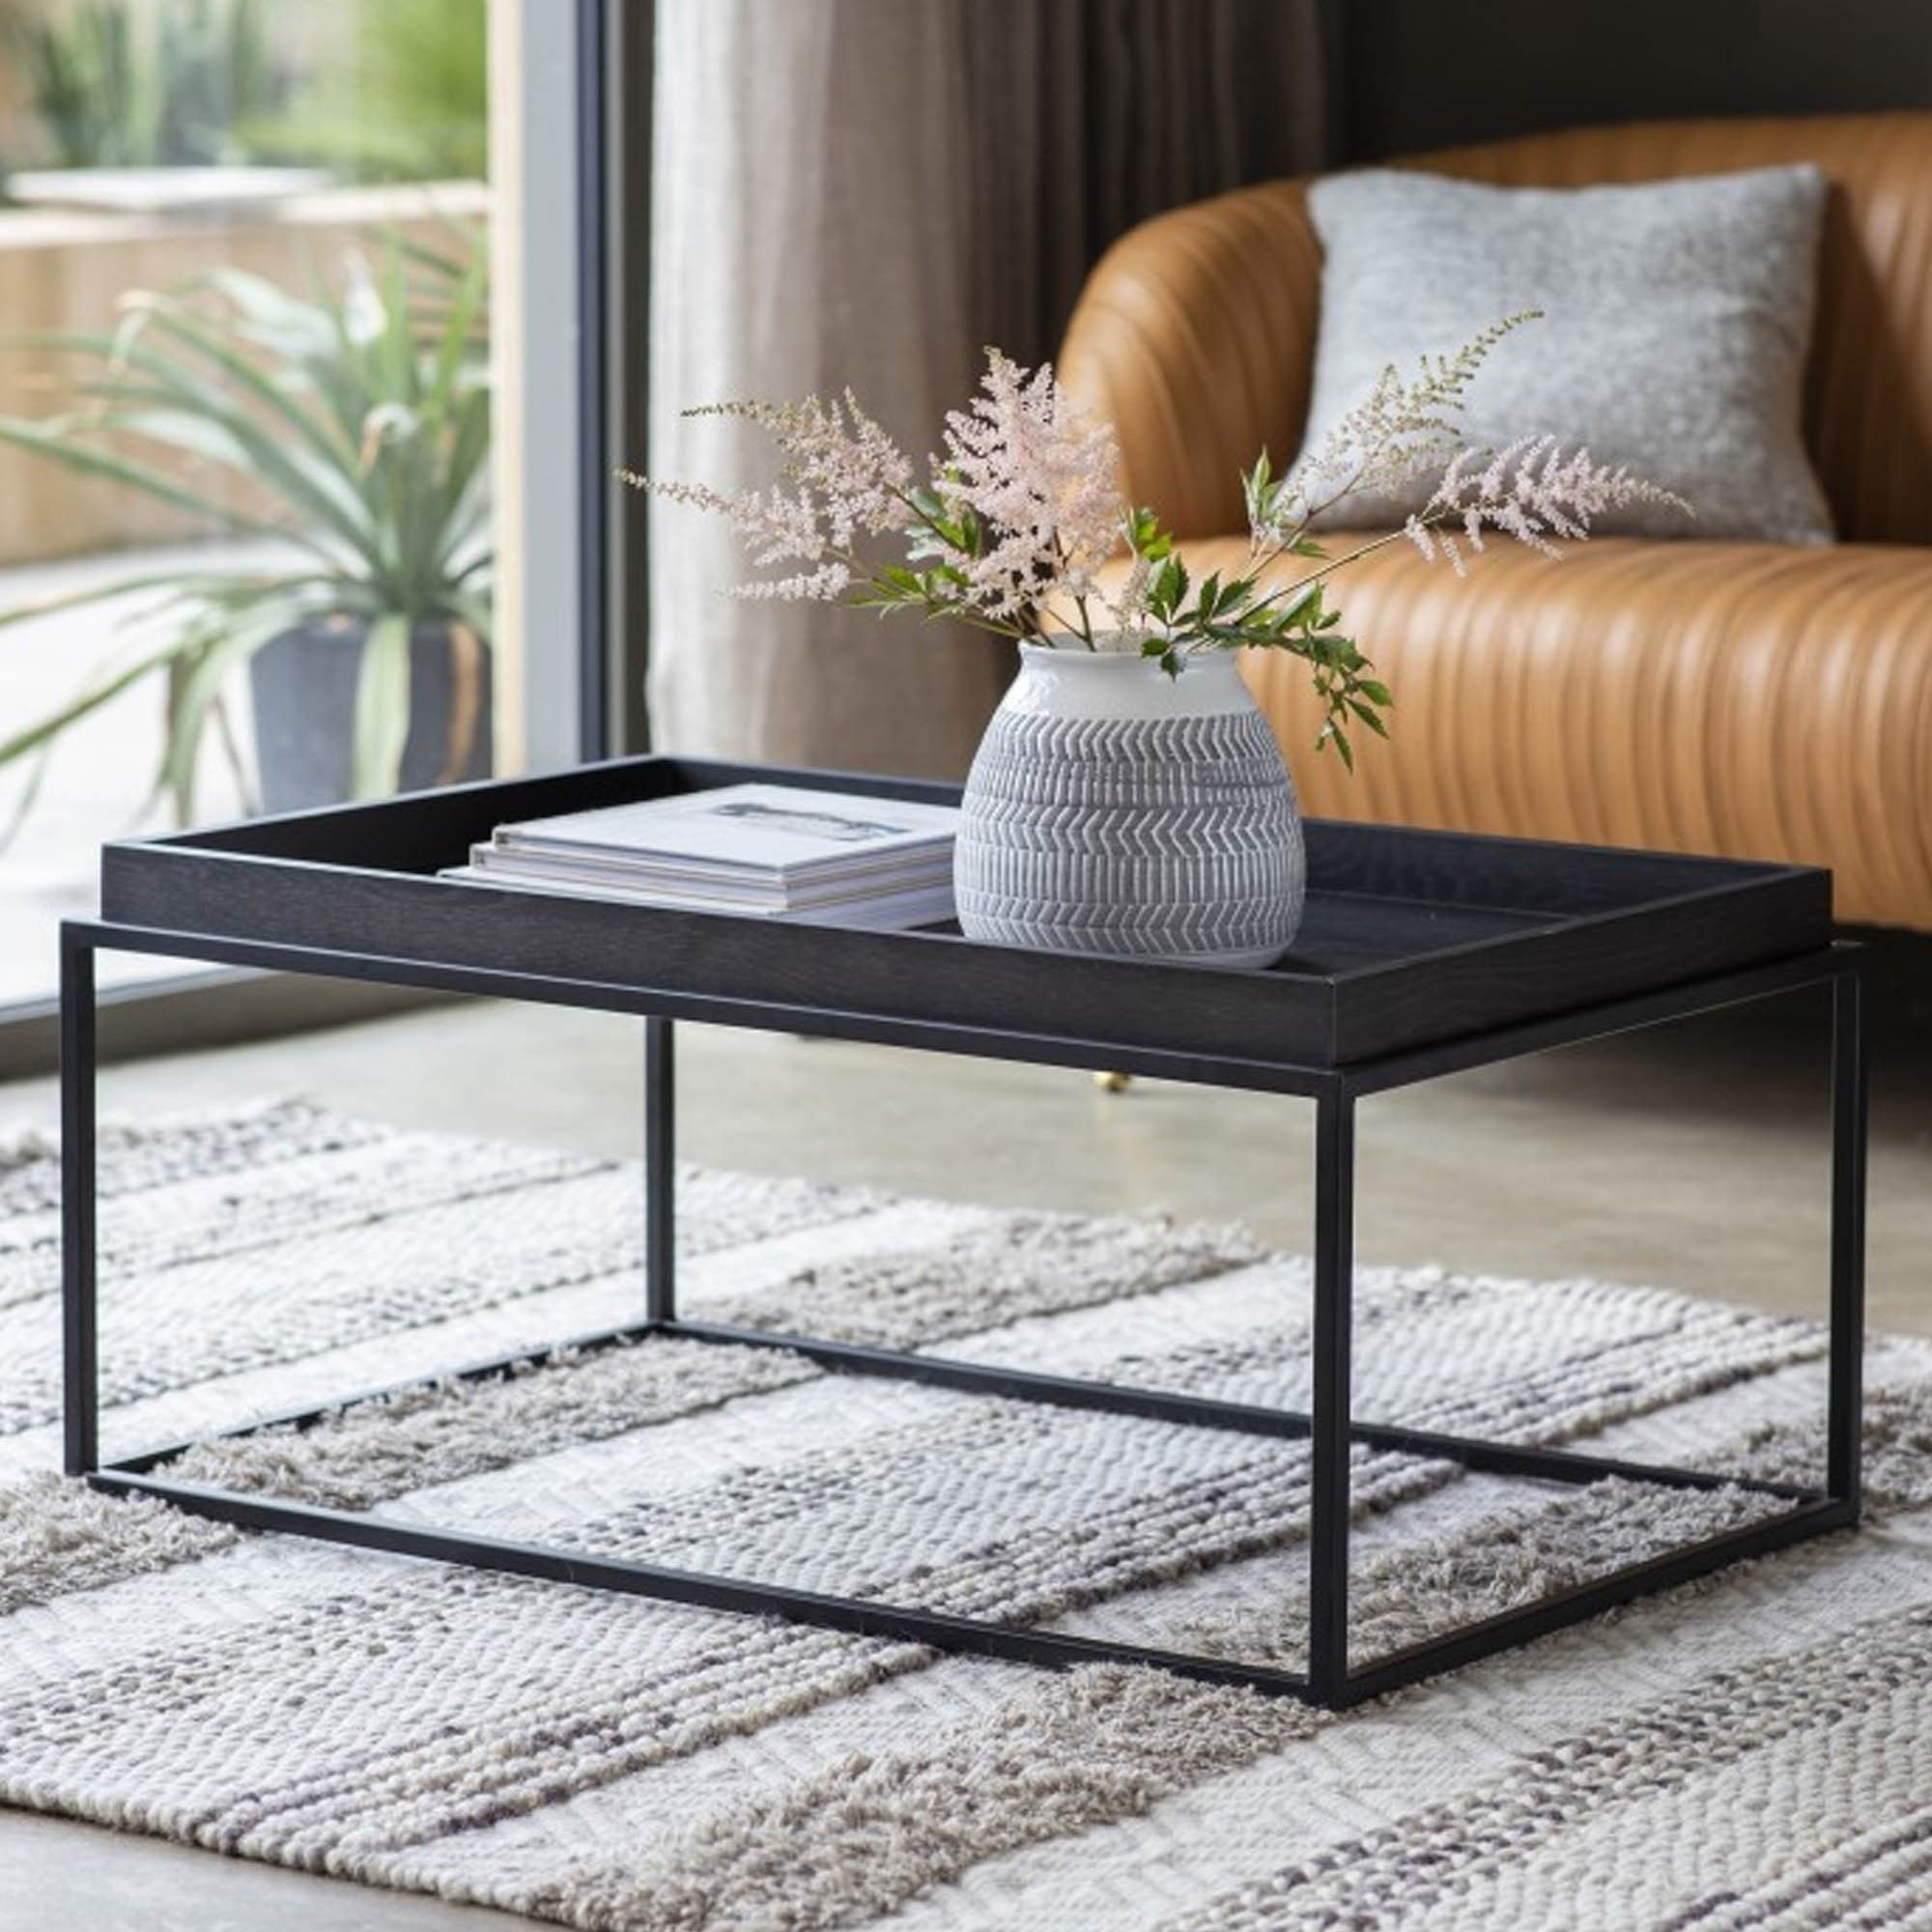 Forden Tray Coffee Table Black | Modern Coffee Table Within Black And White Coffee Tables (View 7 of 15)